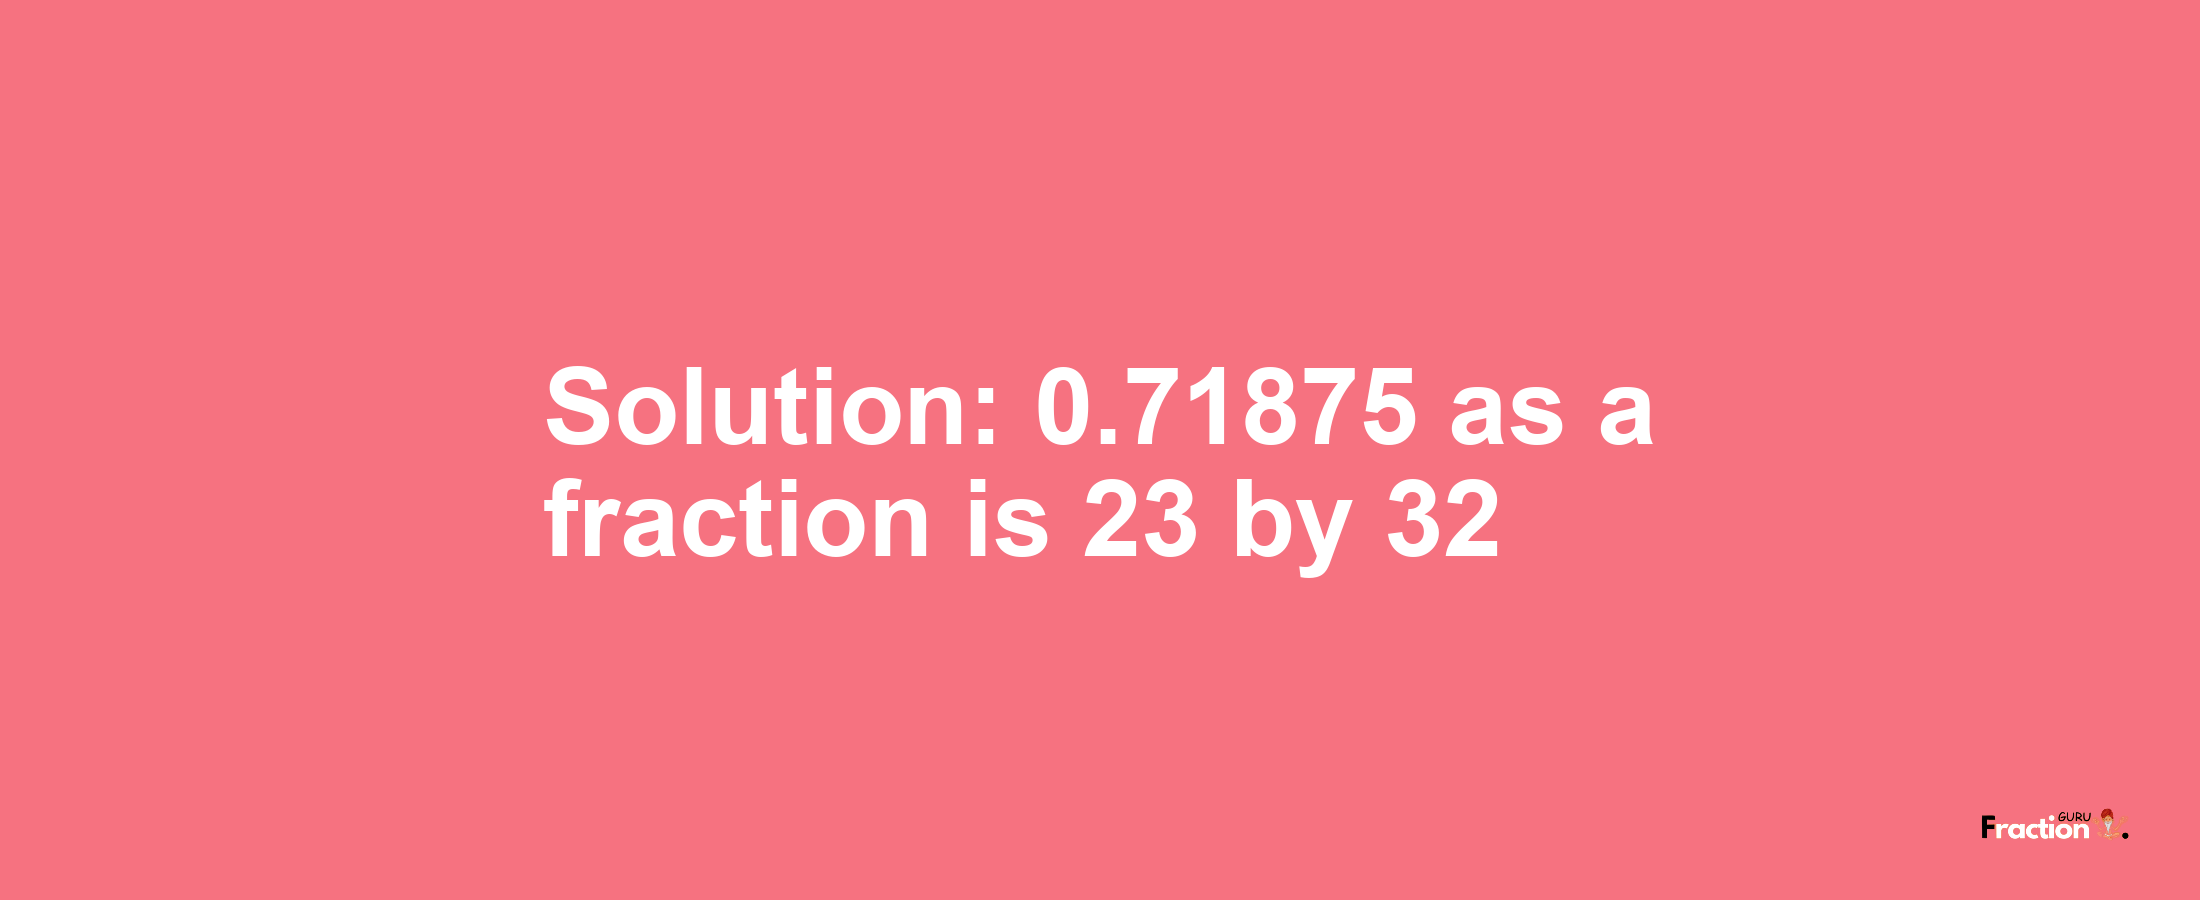 Solution:0.71875 as a fraction is 23/32